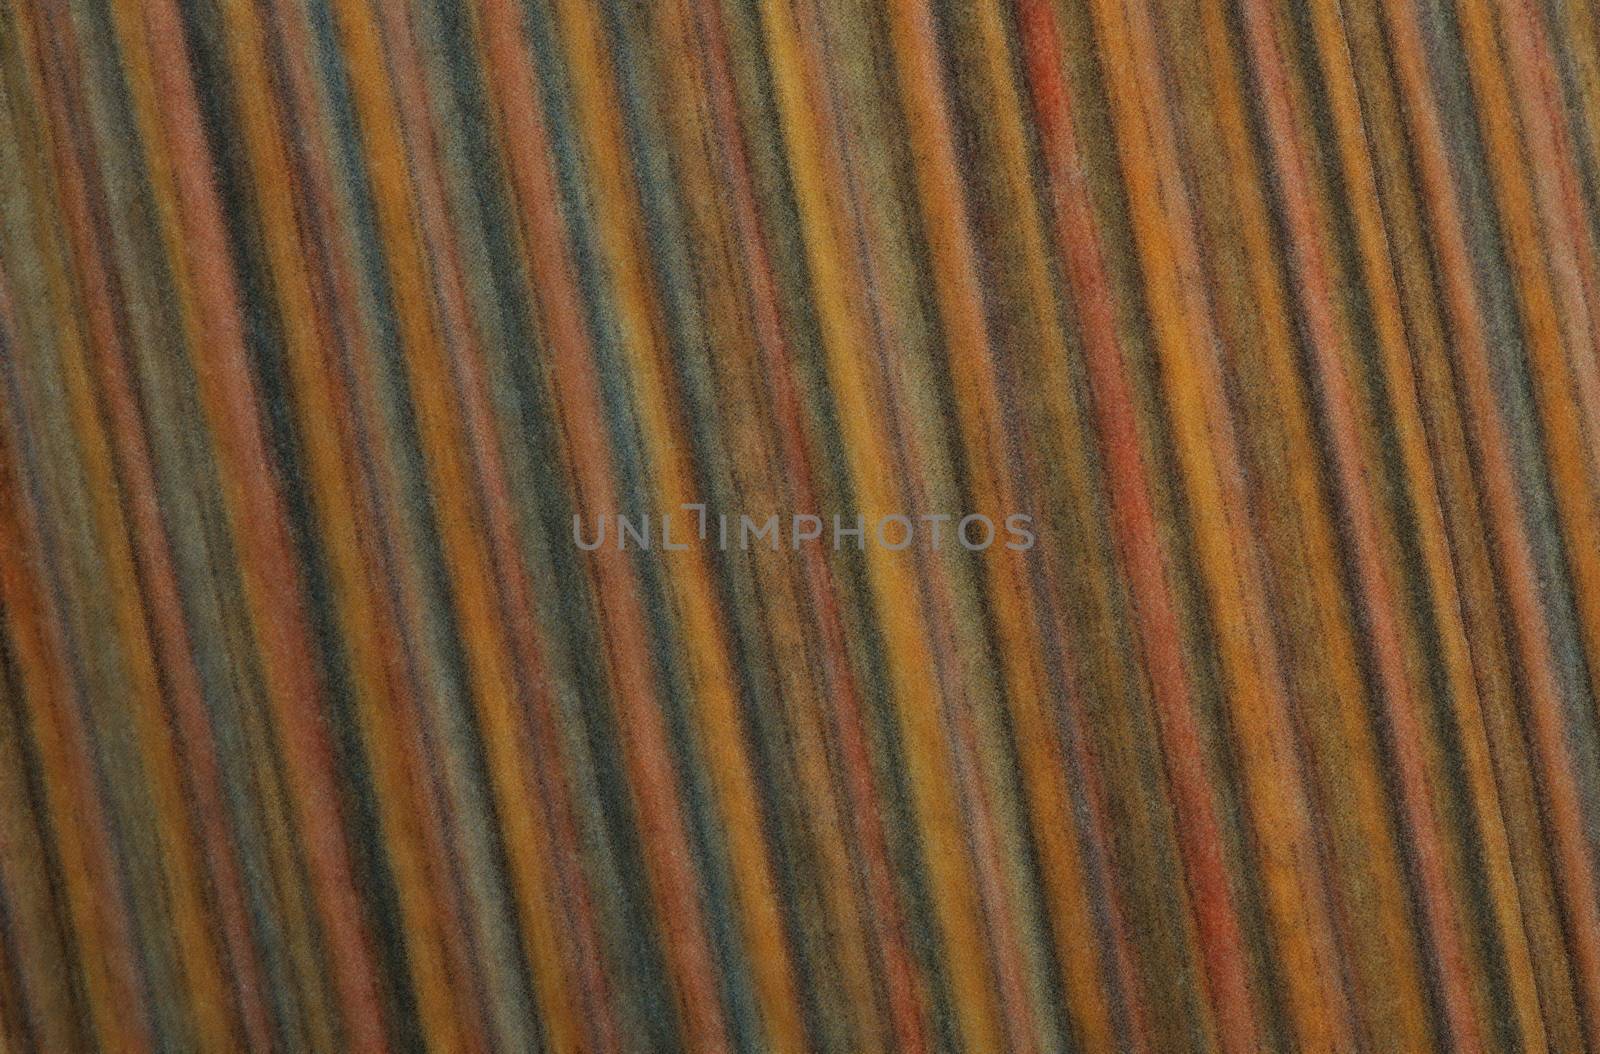 Colorful diagonal striped texture, bamboo pattern floor